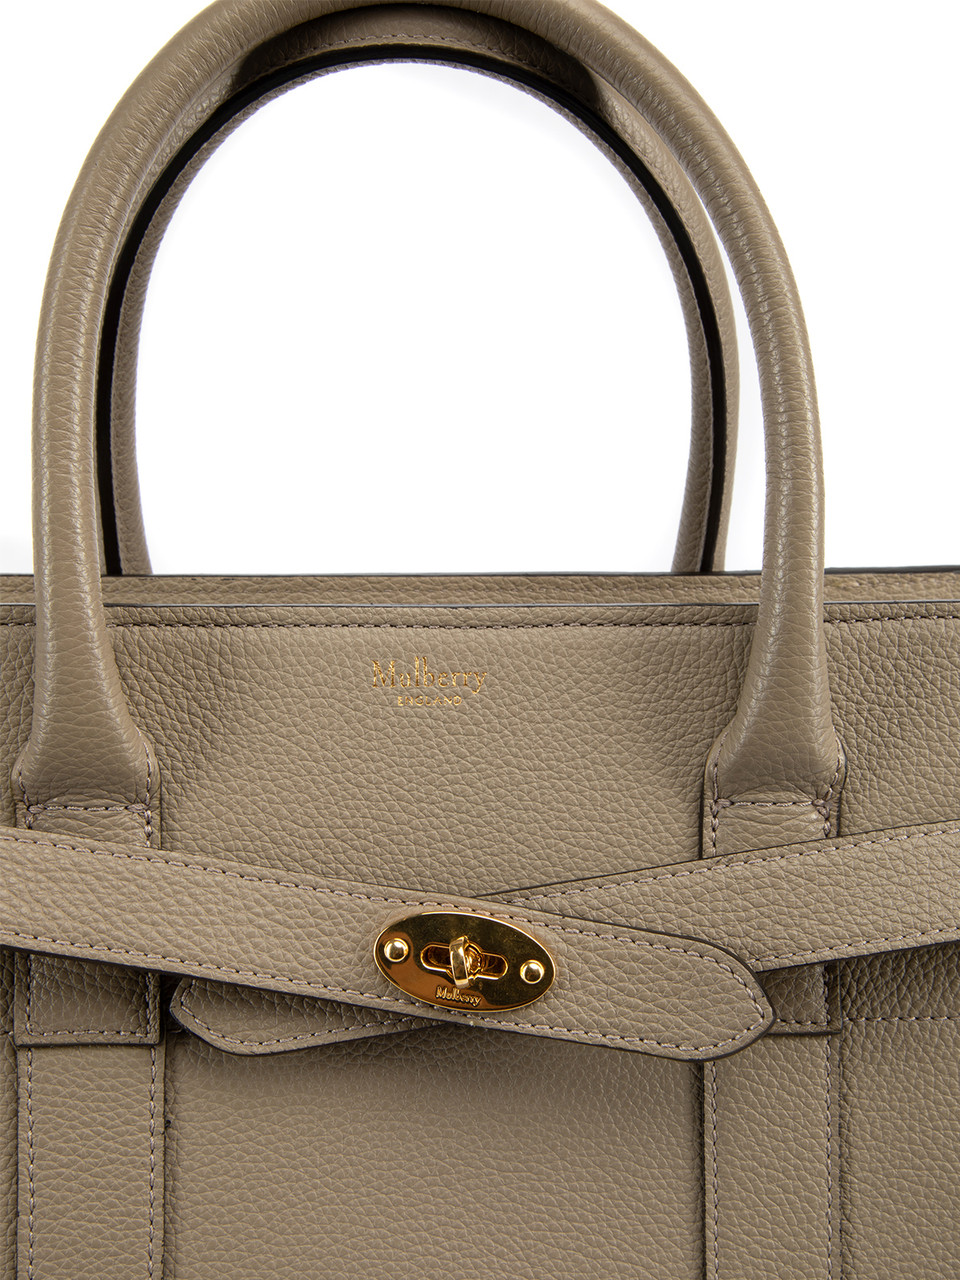 Mulberry Grey Small Zipped Bayswater Bag